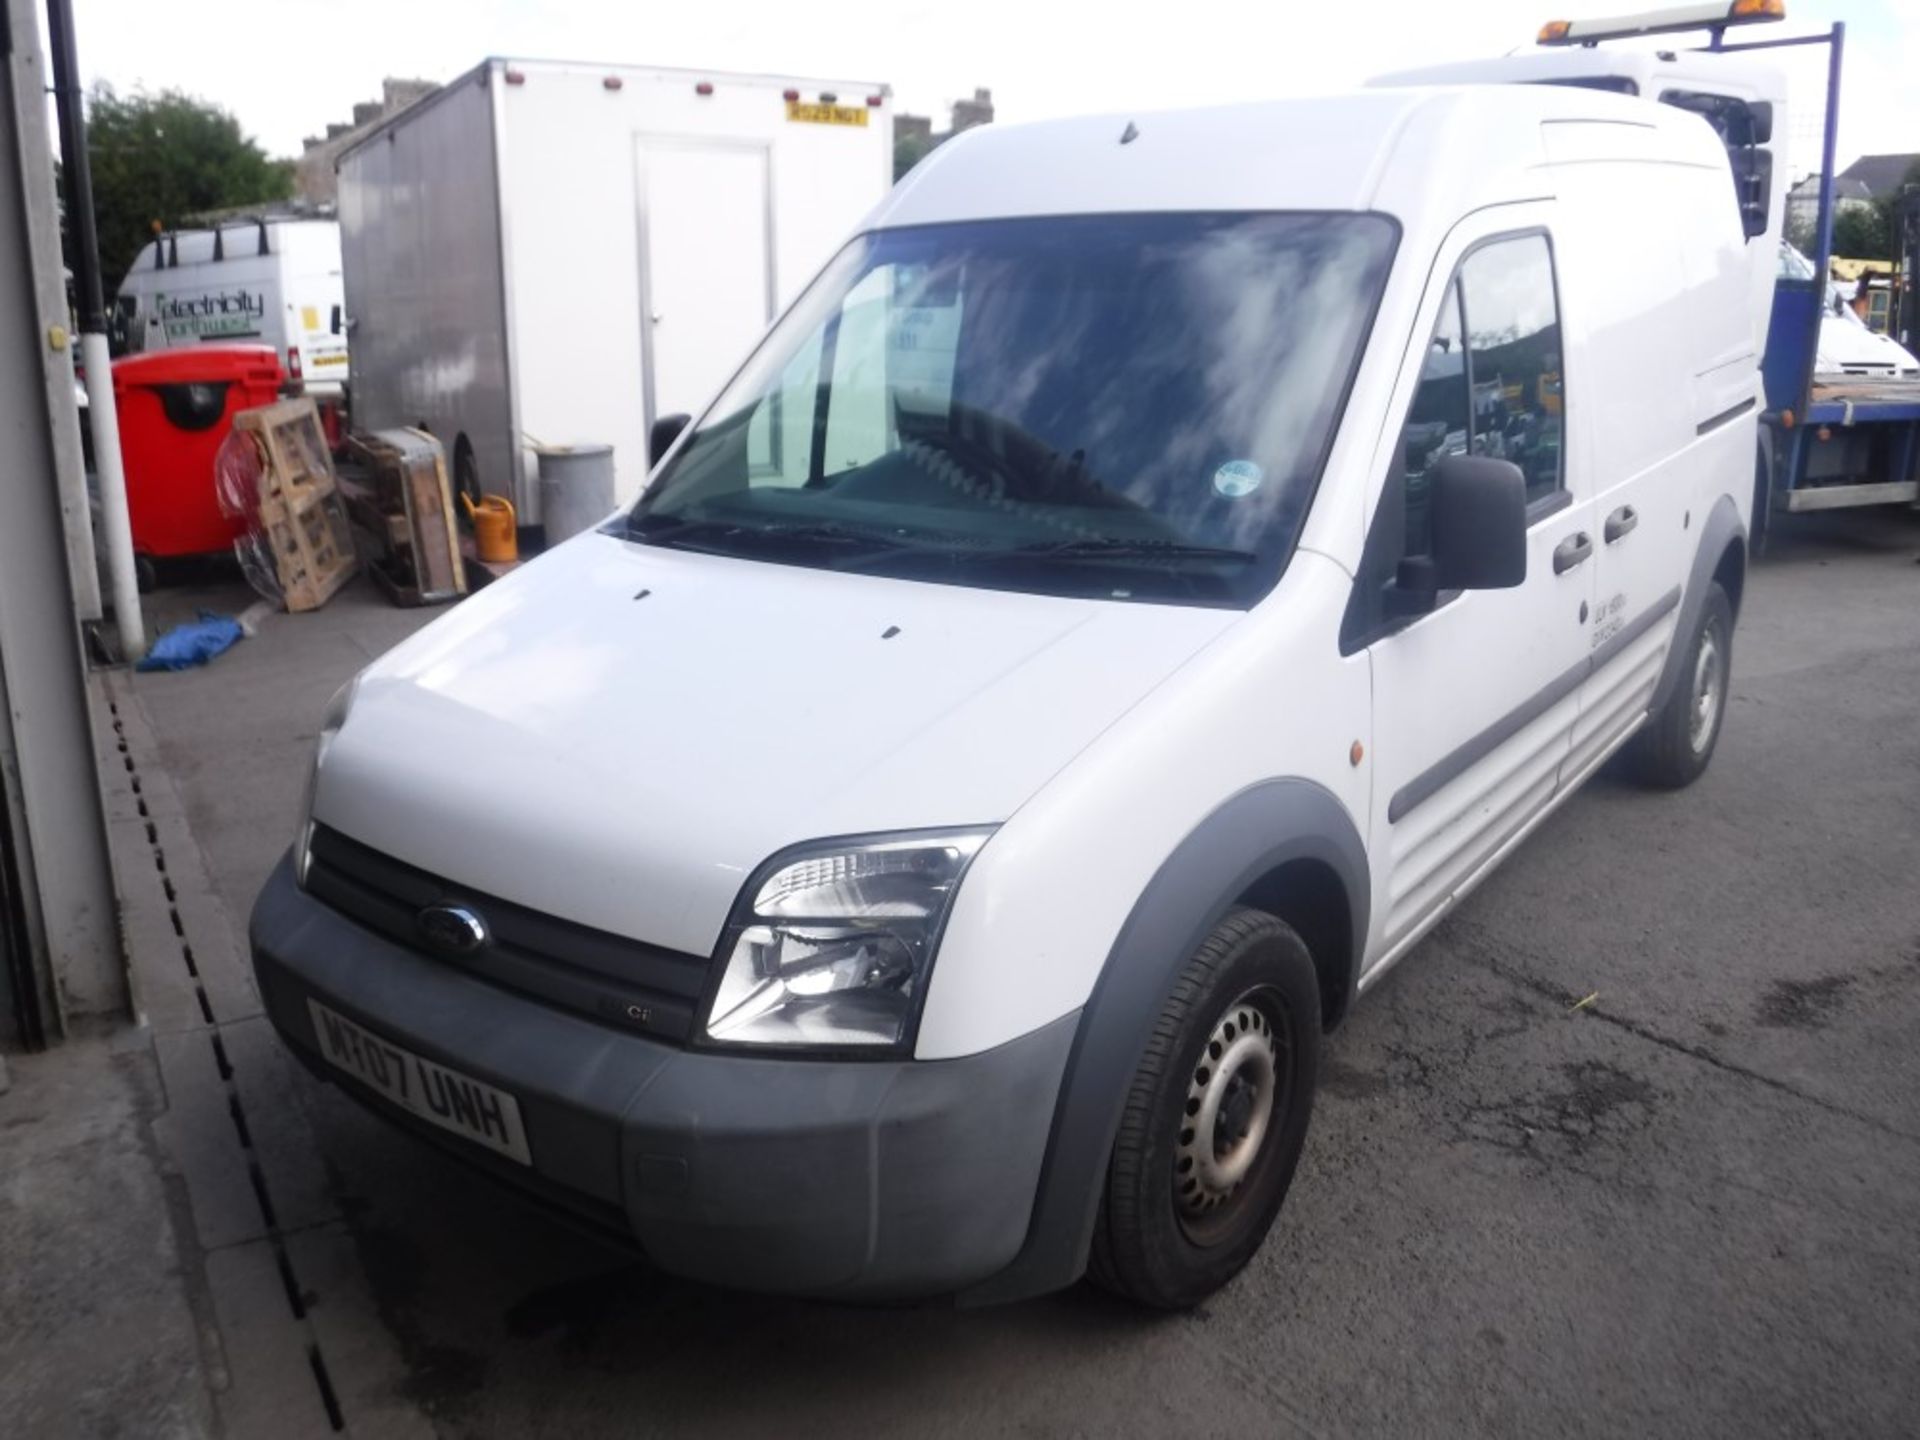 07 reg FORD TRANSIT CONNECT T230 (DIRECT COUNCIL) 1ST REG 07/07, 48359M, V5 HERE, 1 OWNER FROM - Image 2 of 5